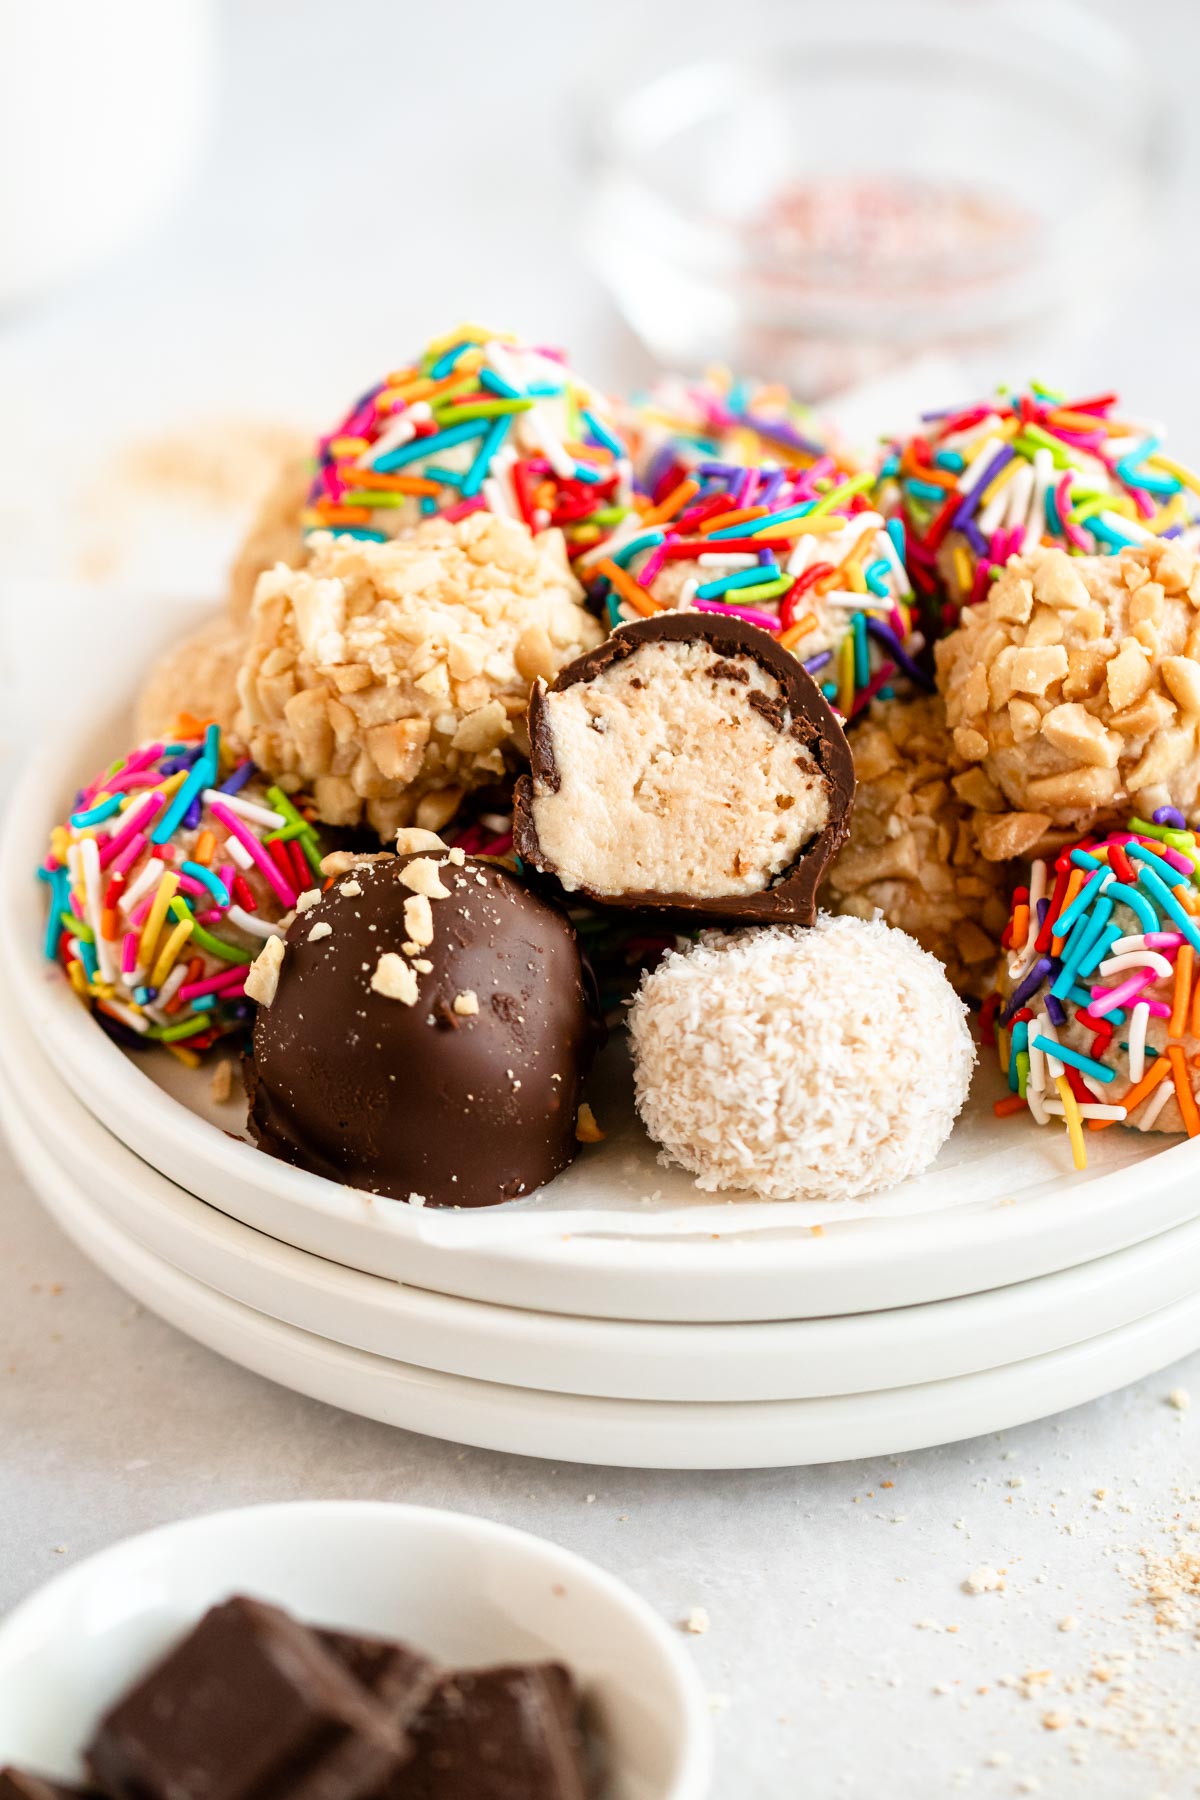 Cheesecake balls on a plate with the top one missing a bite.